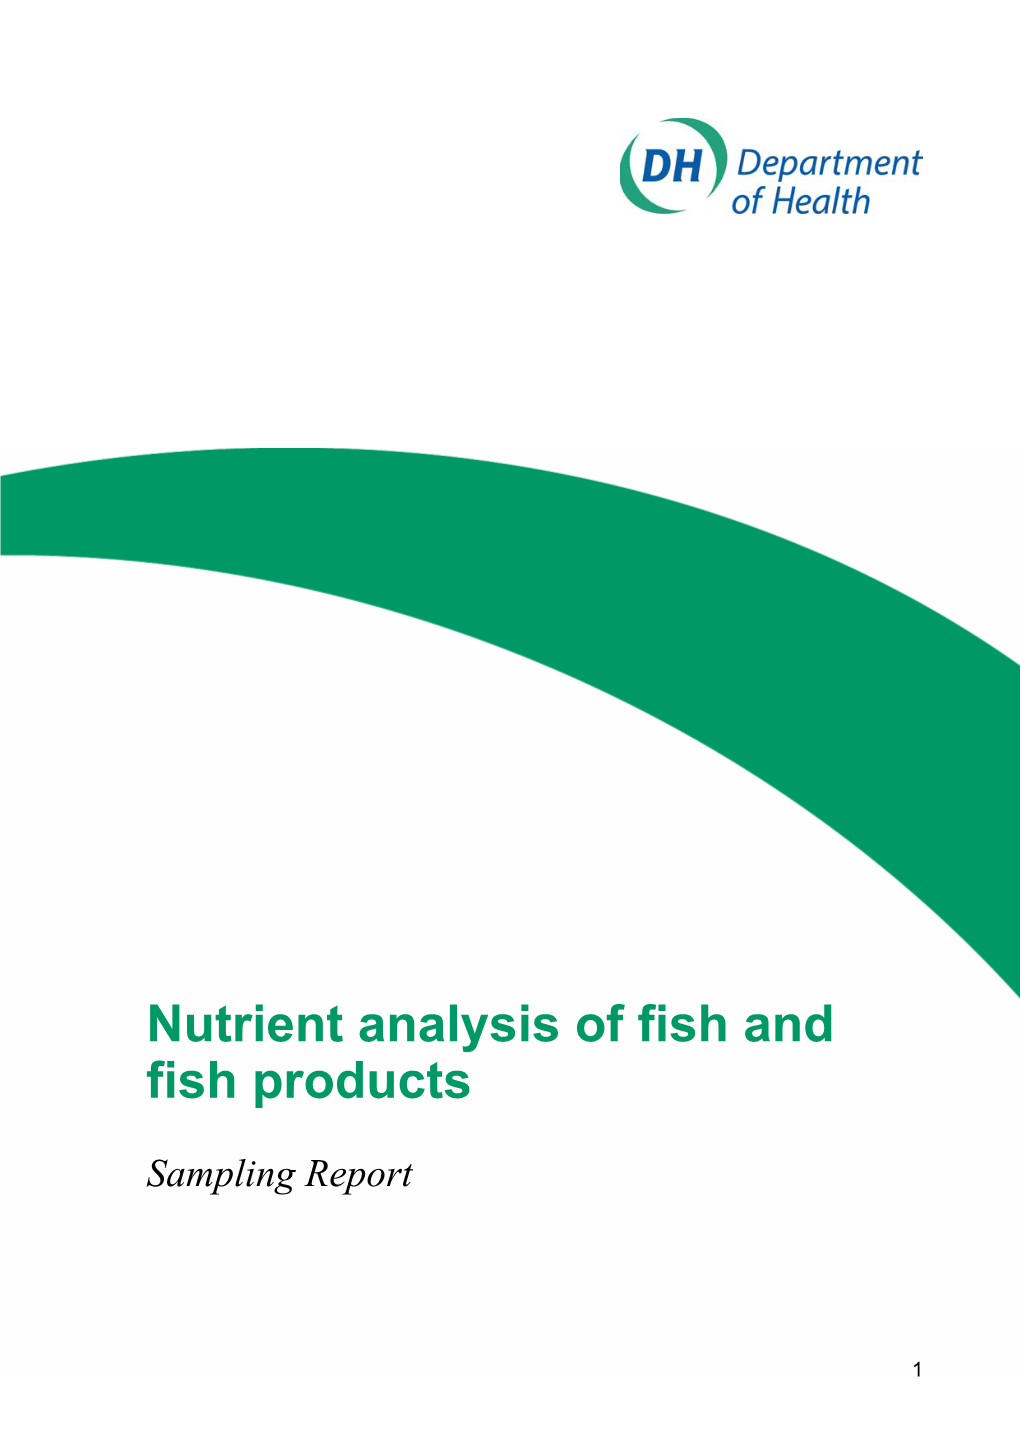 Nutrient Analysis of Fish and Fish Products